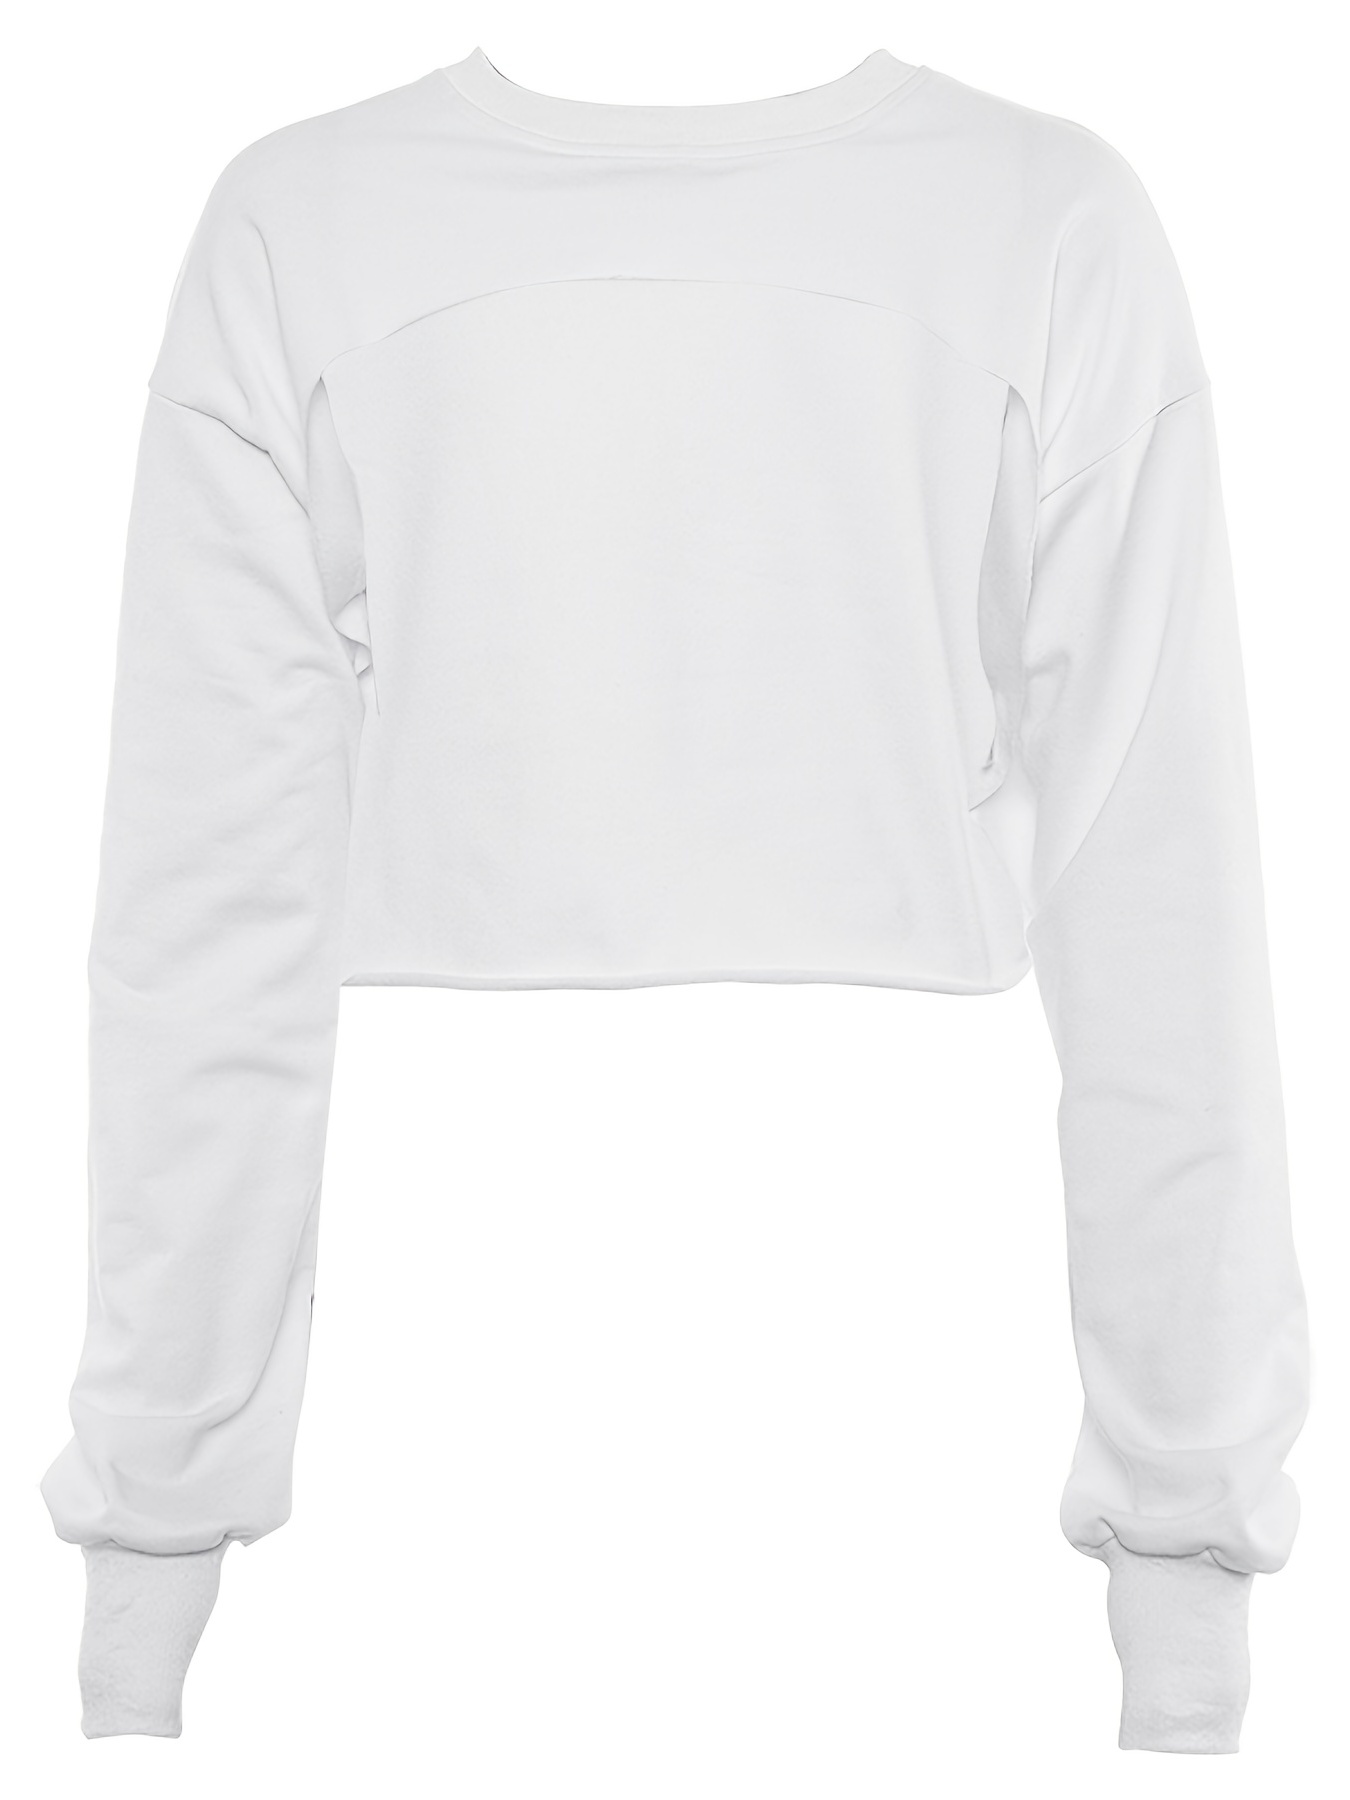 Slashed Long Sleeve White Crop Top, Crop Tops for Women, Cropped